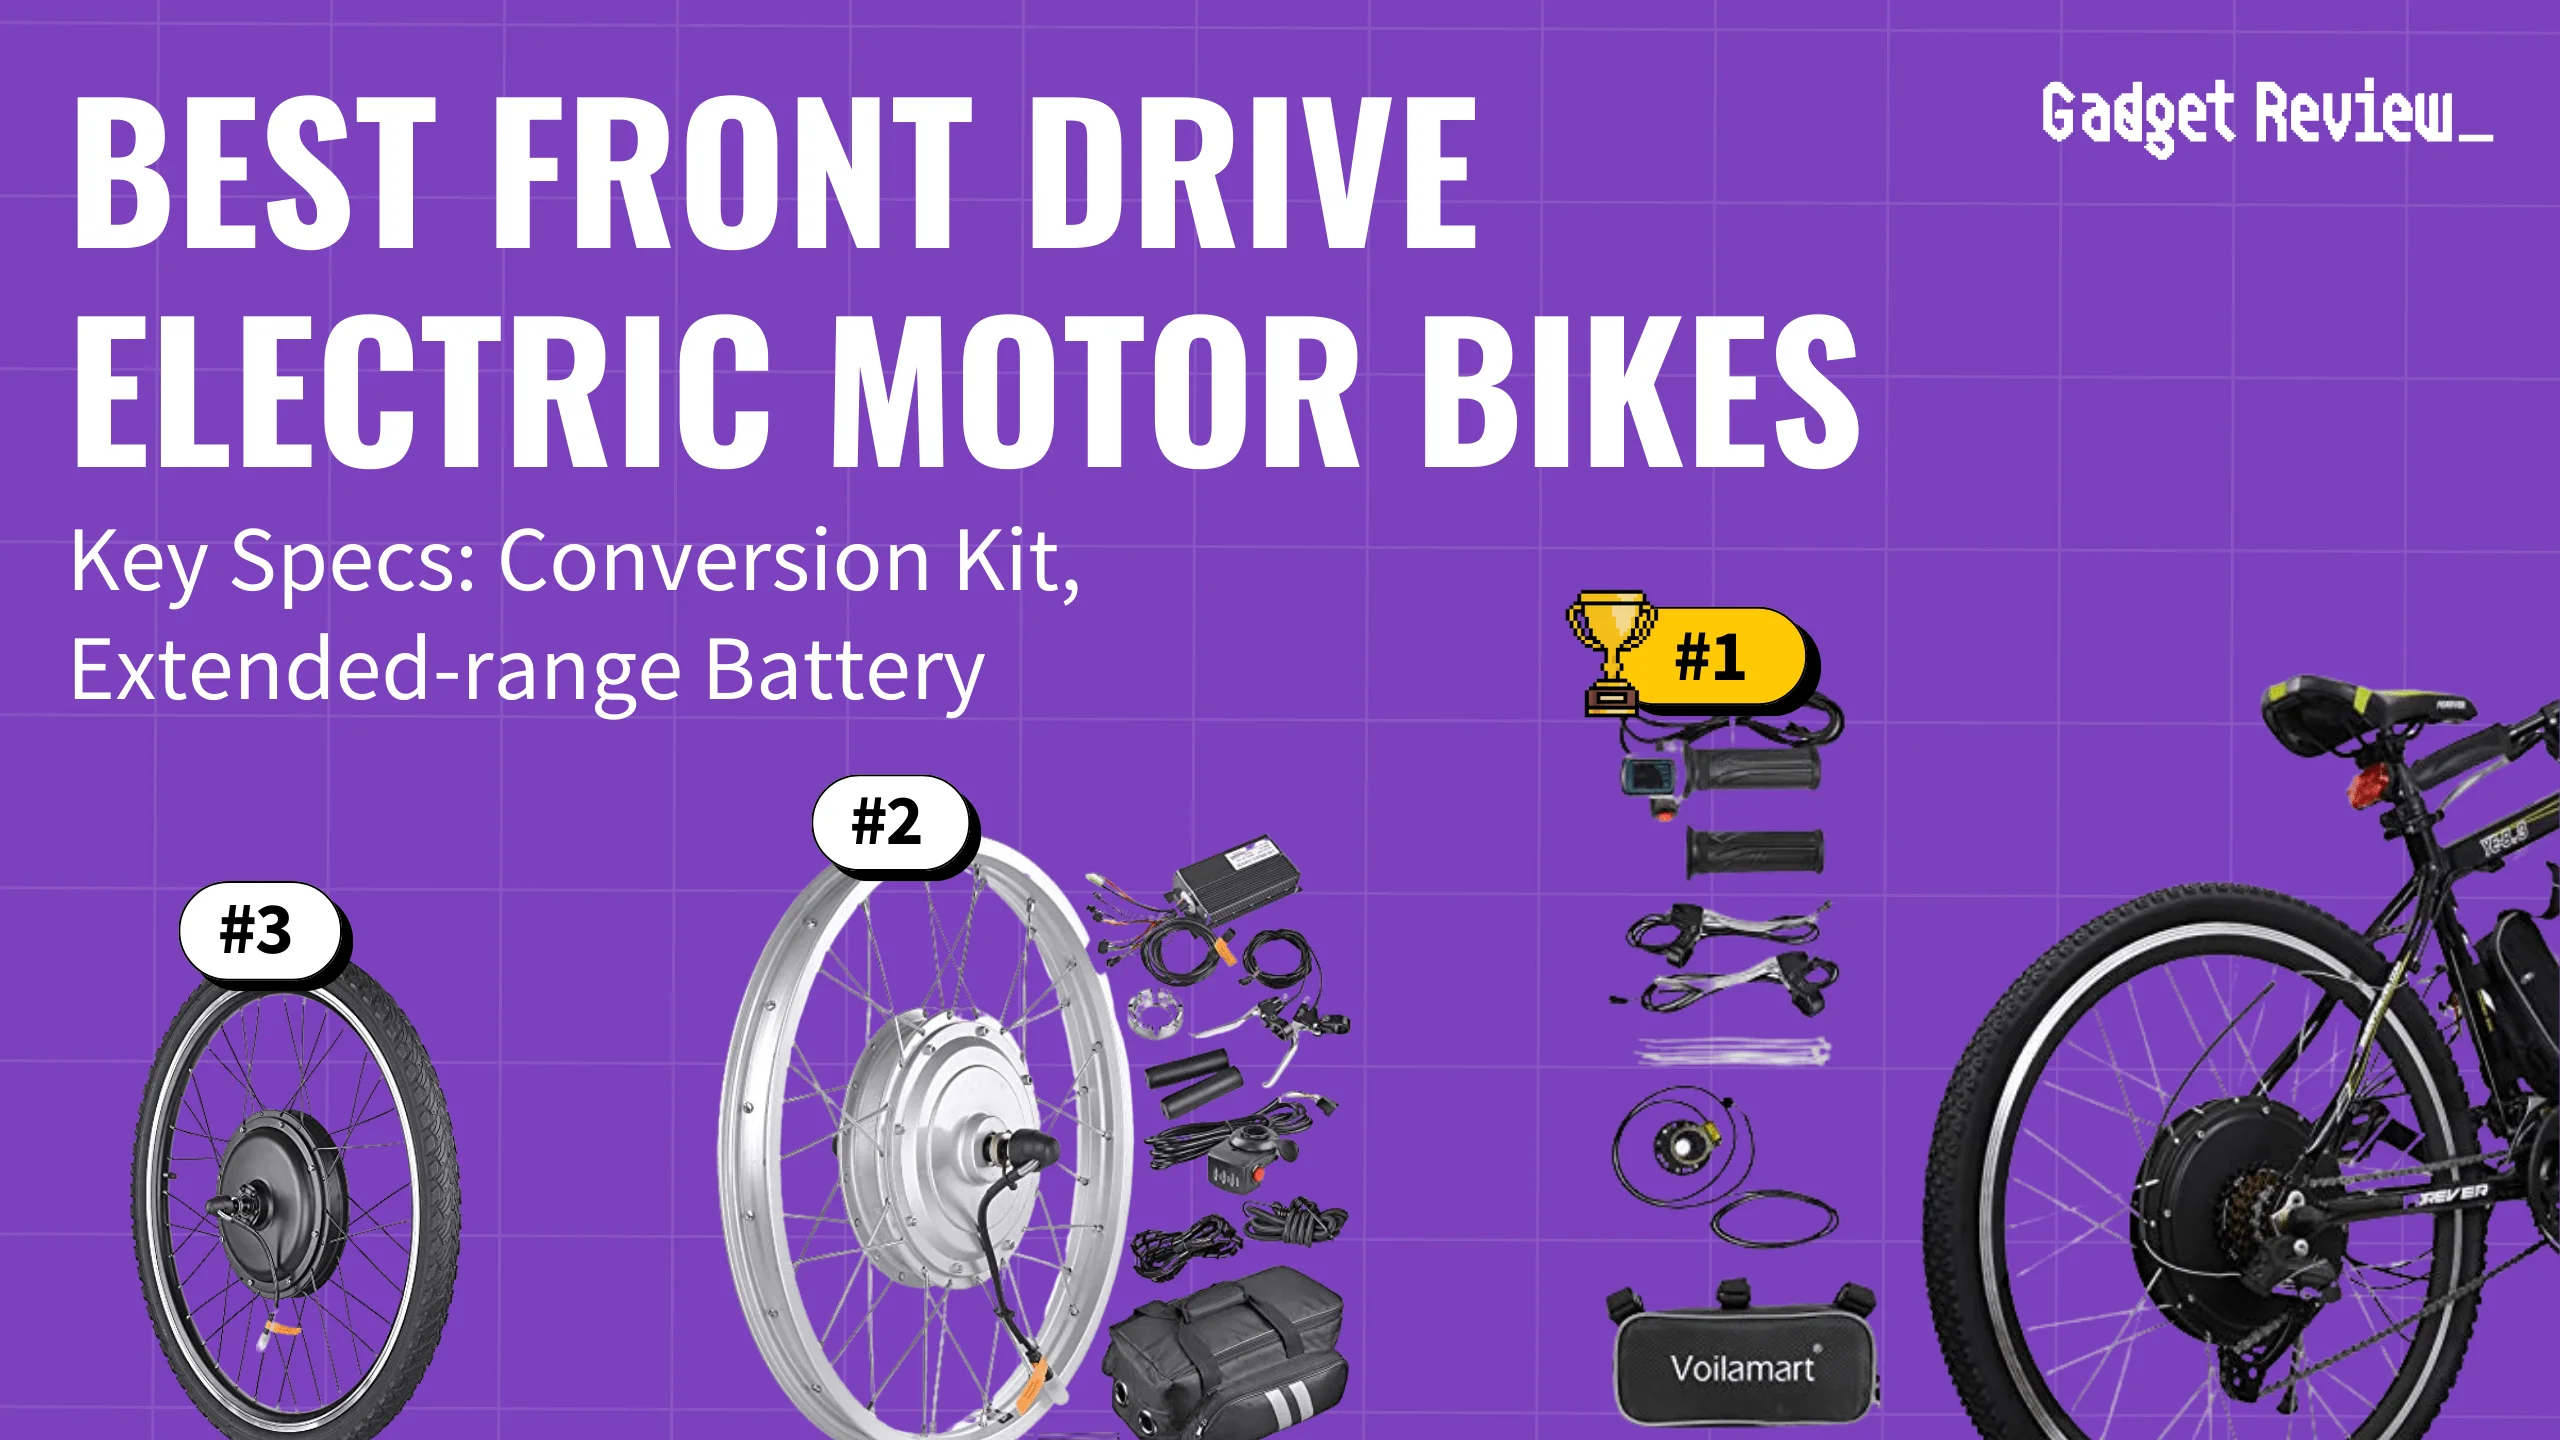 Best Front Drive Electric Motor Bikes